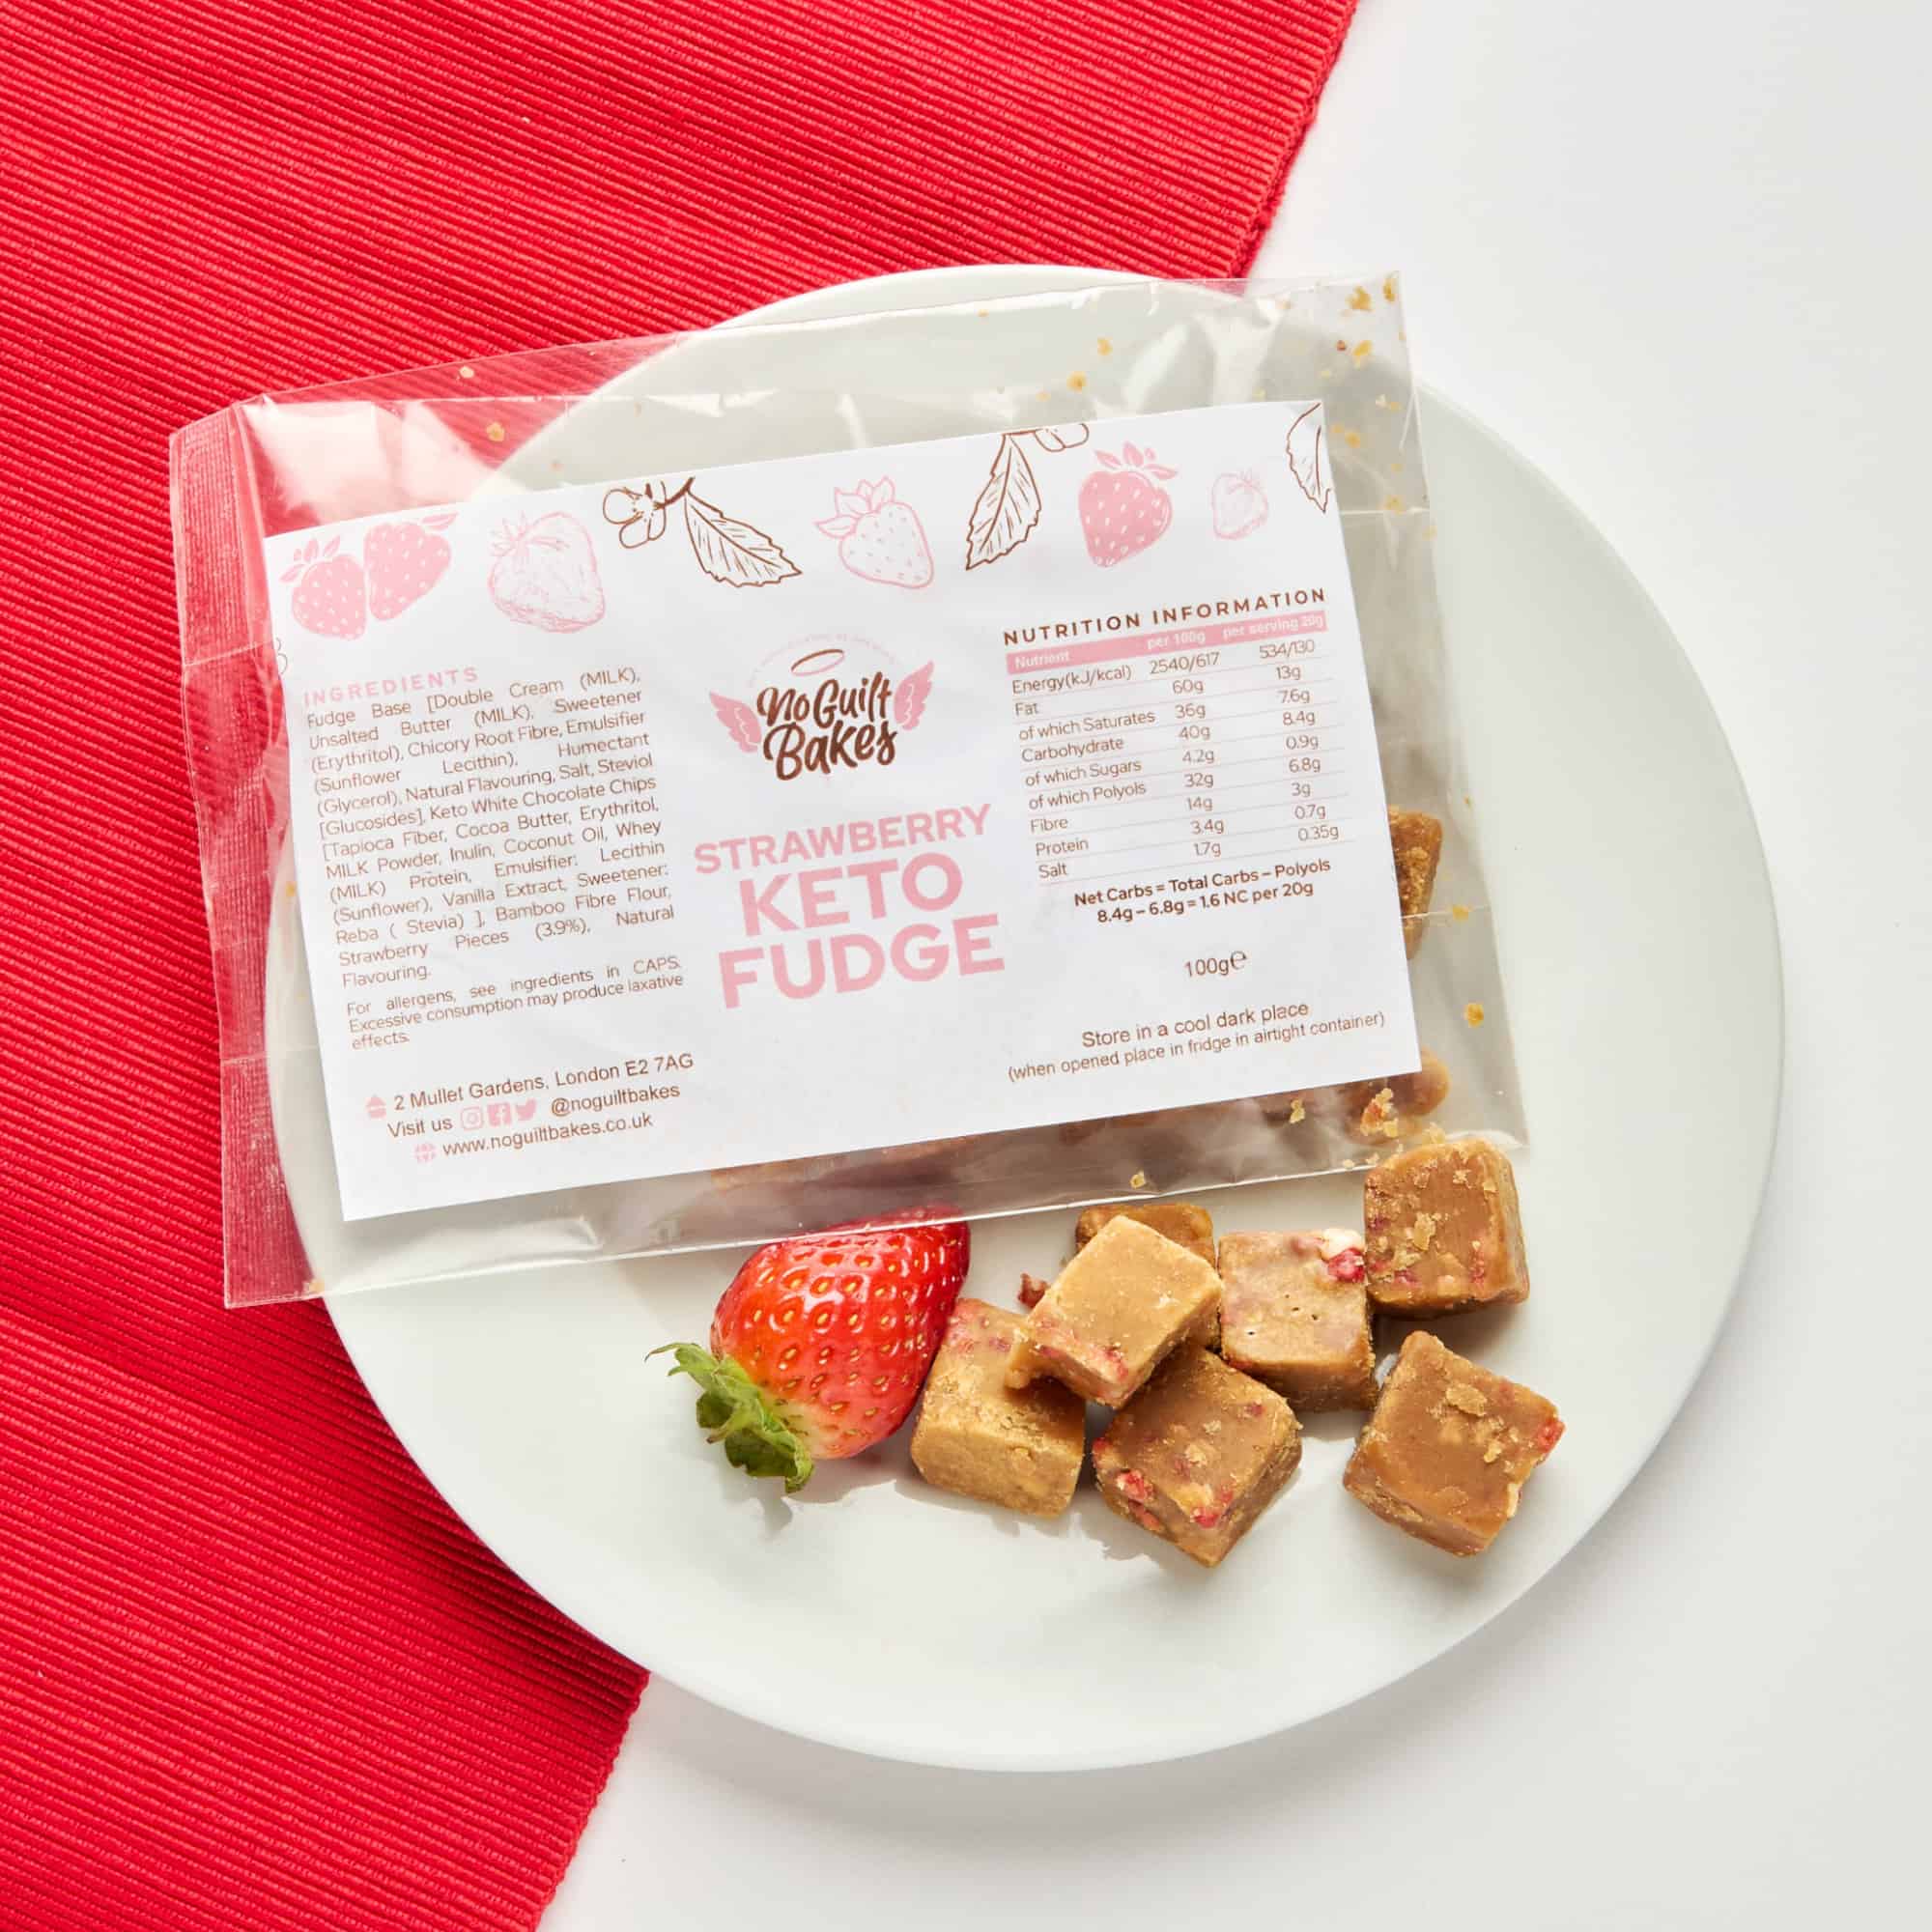 A plate with strawberries and a bag of No Guilt Bakes Strawberry Fudge, a delicious low-sugar treat.